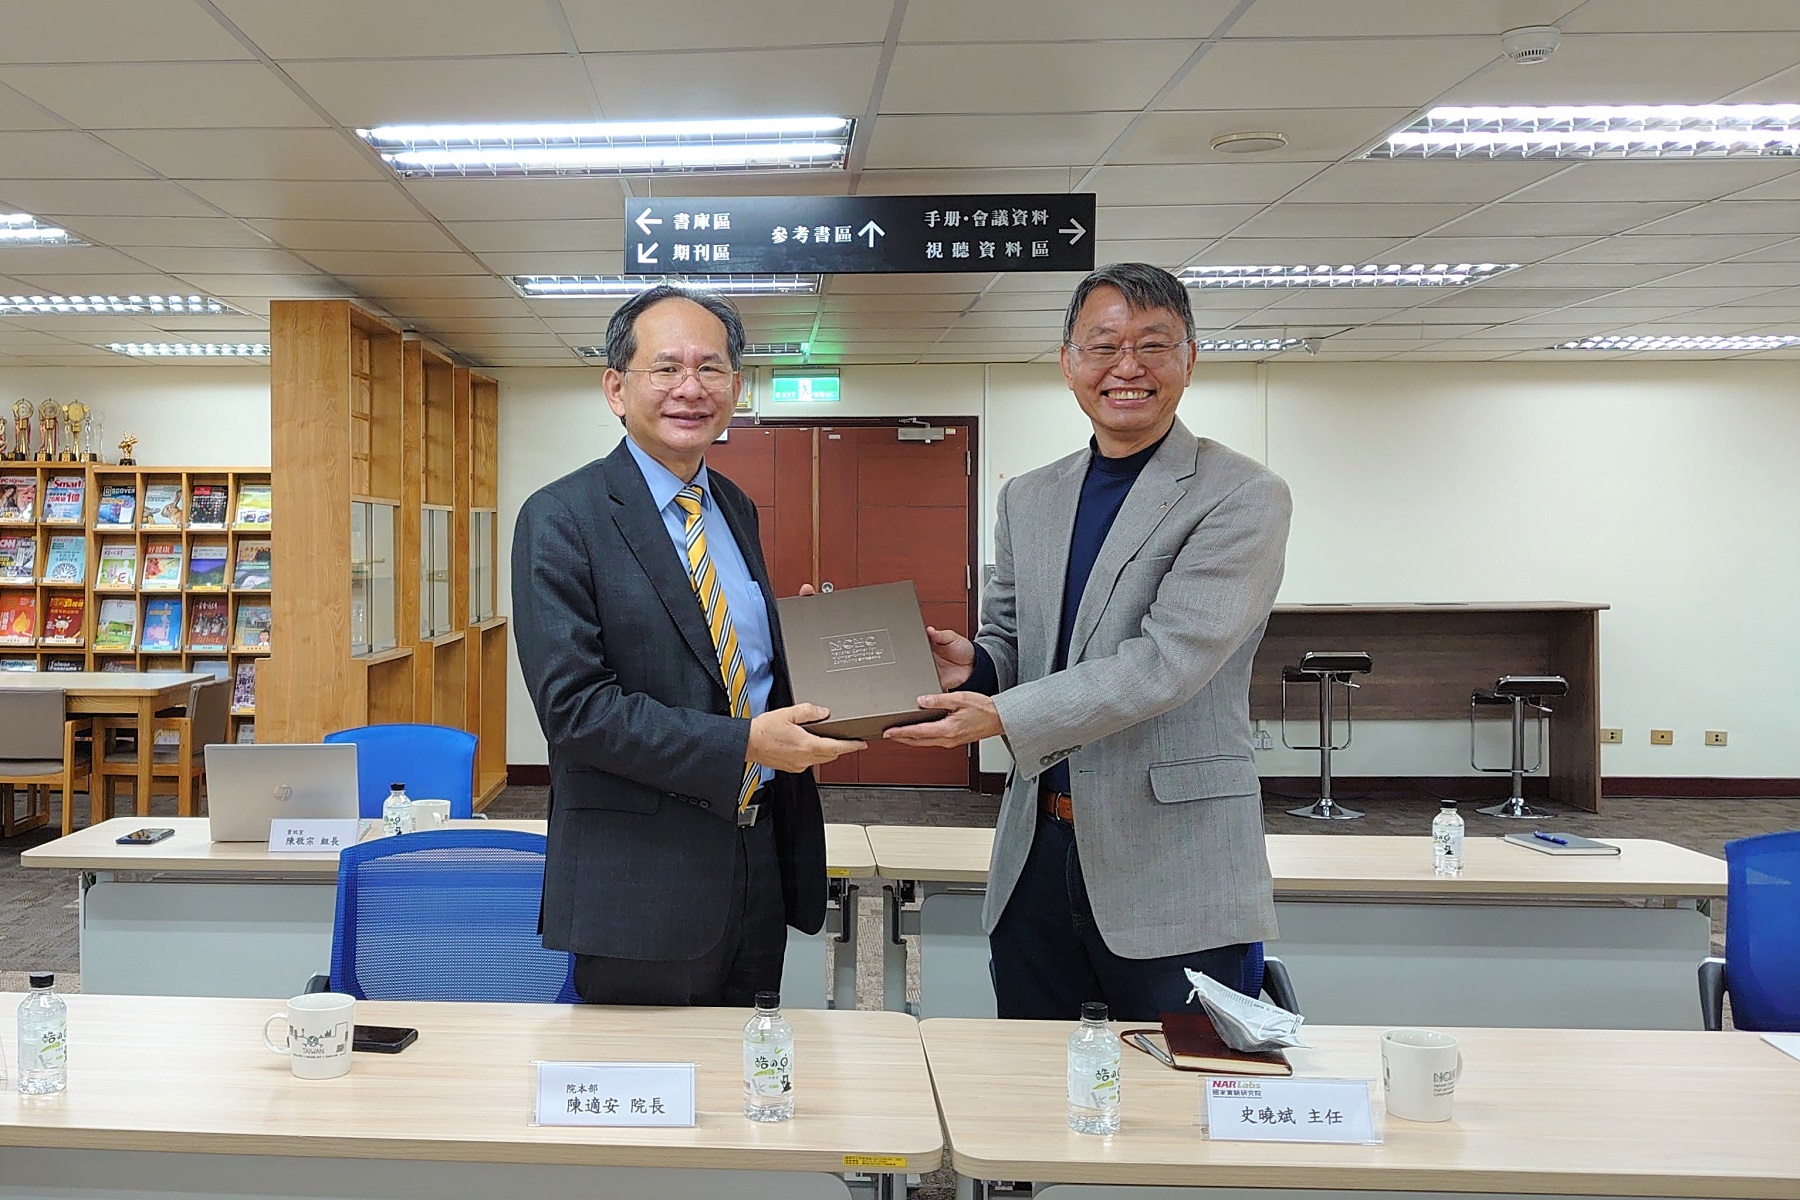 Dr. Chen Shih-Ann of Taichung VGH and Director General Shepherd Shi of the NCHC hope that the NCHC may help propel Taichung VGH's push for innovative smart medical care for the people of the nation.